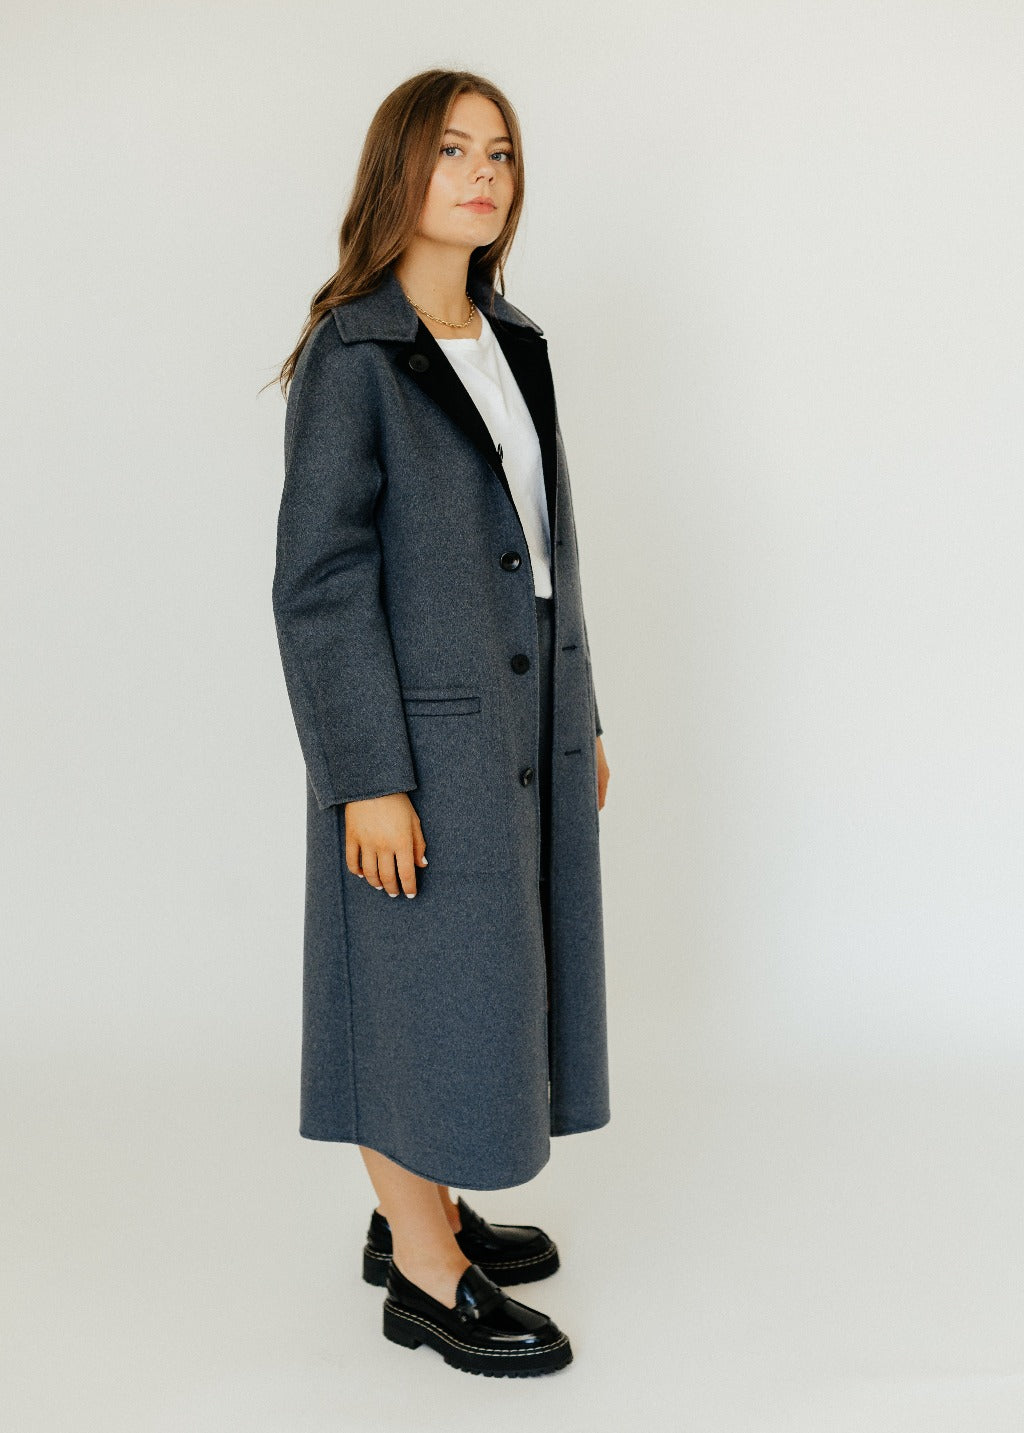 REVERSIBLE DOUBLE FACED COAT - Brown, ZARA United States